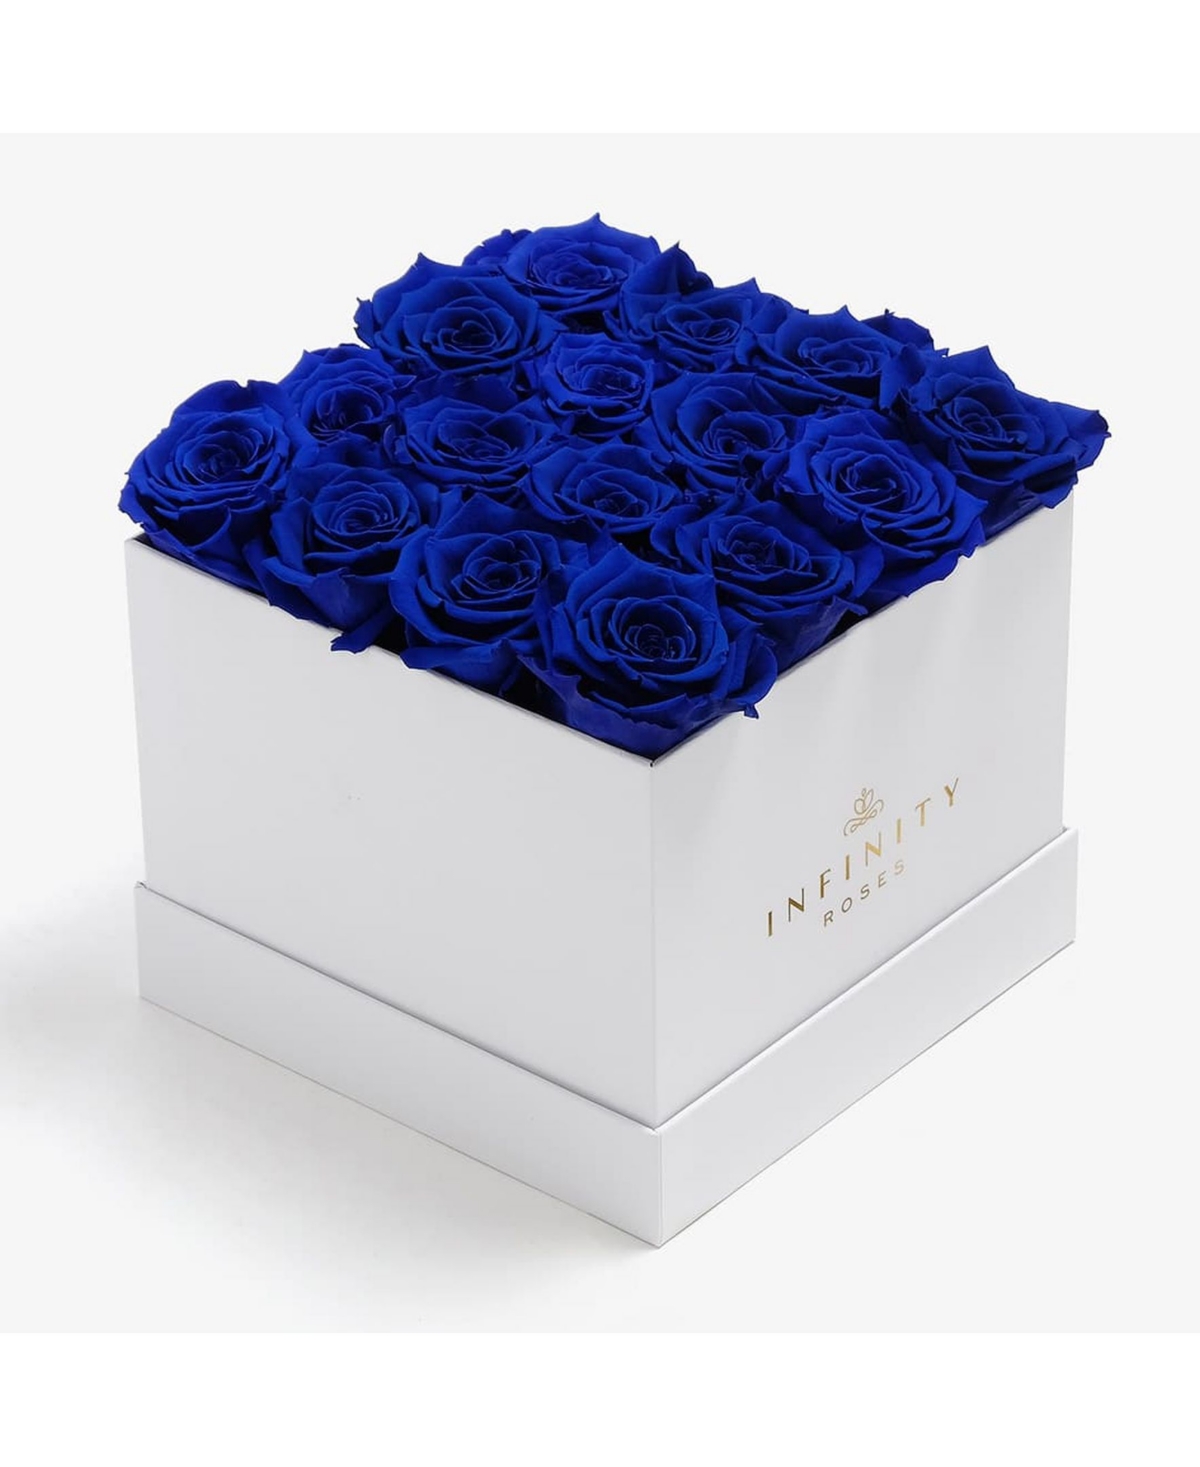 Square Box of 16 Blue Real Roses Preserved to Last Over A Year, Large - Royal Blue